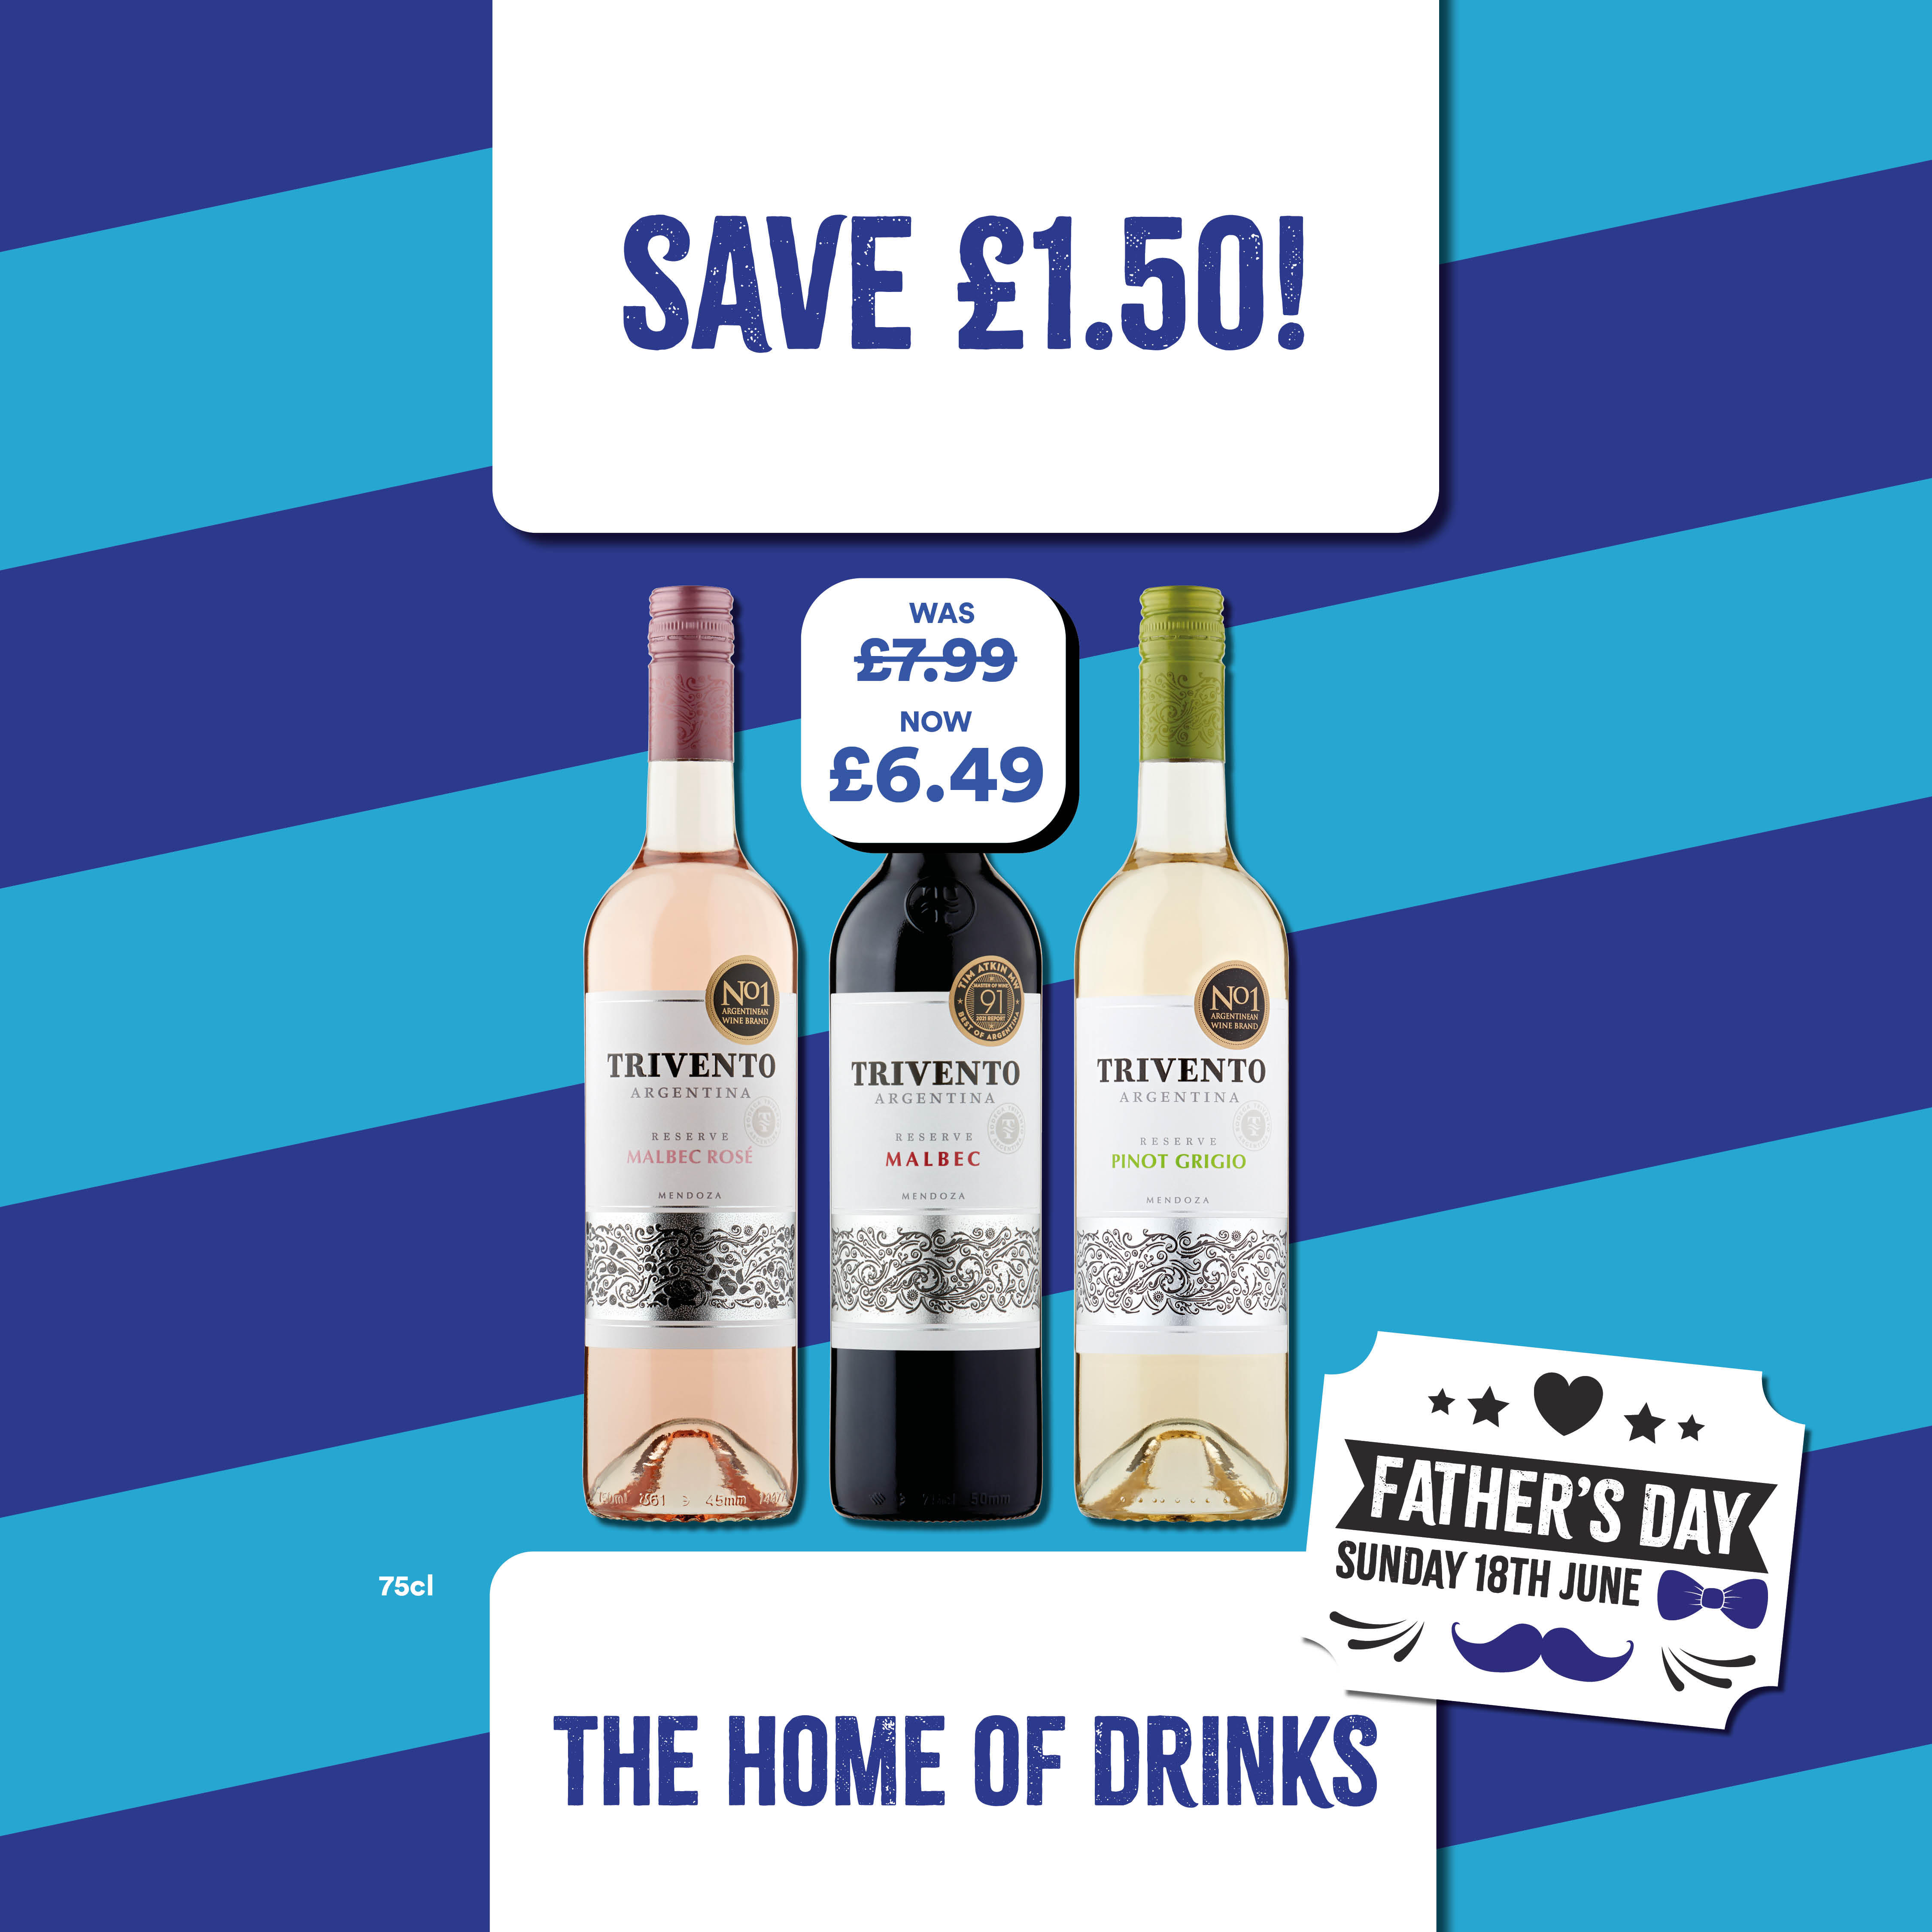 Save £1.50 on Trivento Malbec Rose, Malbec and Pinot Grigio. Bargain Booze Whitby 01947 820737